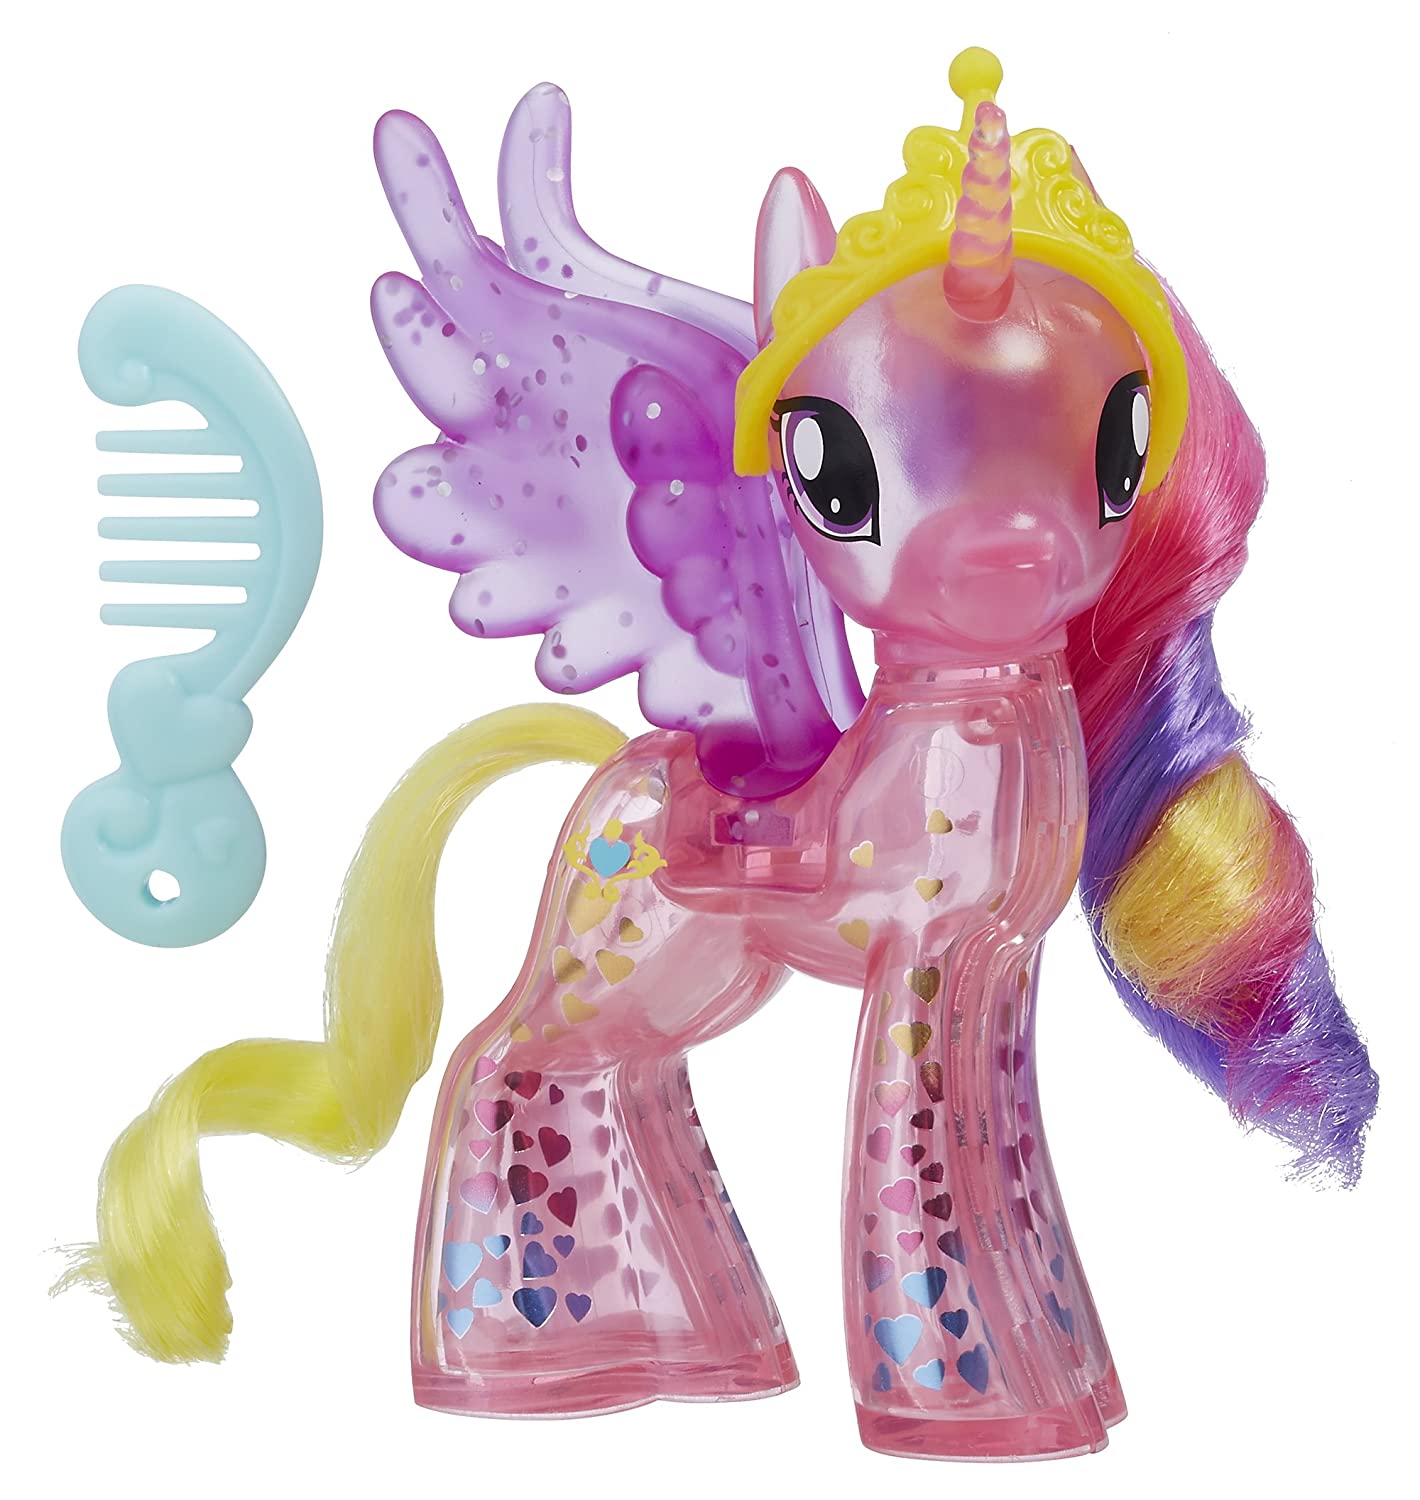 Top 11 Best My Little Pony Toys Reviews in 2022 11